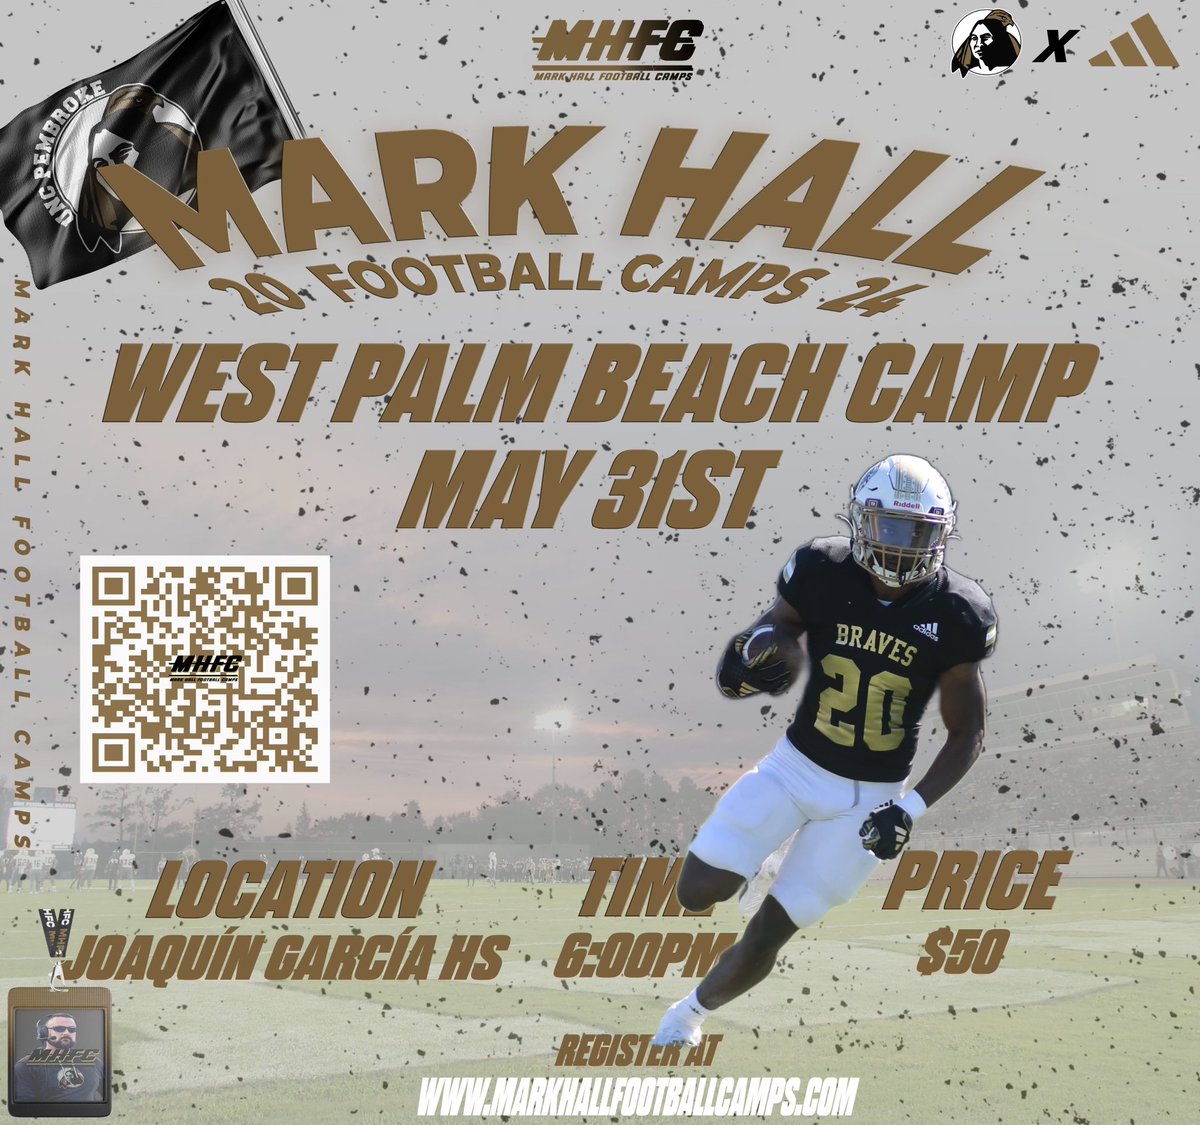 Florida, LAST FEW DAYS TO SIGN 🆙 Opportunity on deck. UNCP Football is coming to town and has invited more than 25 college coaches from all over. BCP will be in-house also and will invite our media connects.